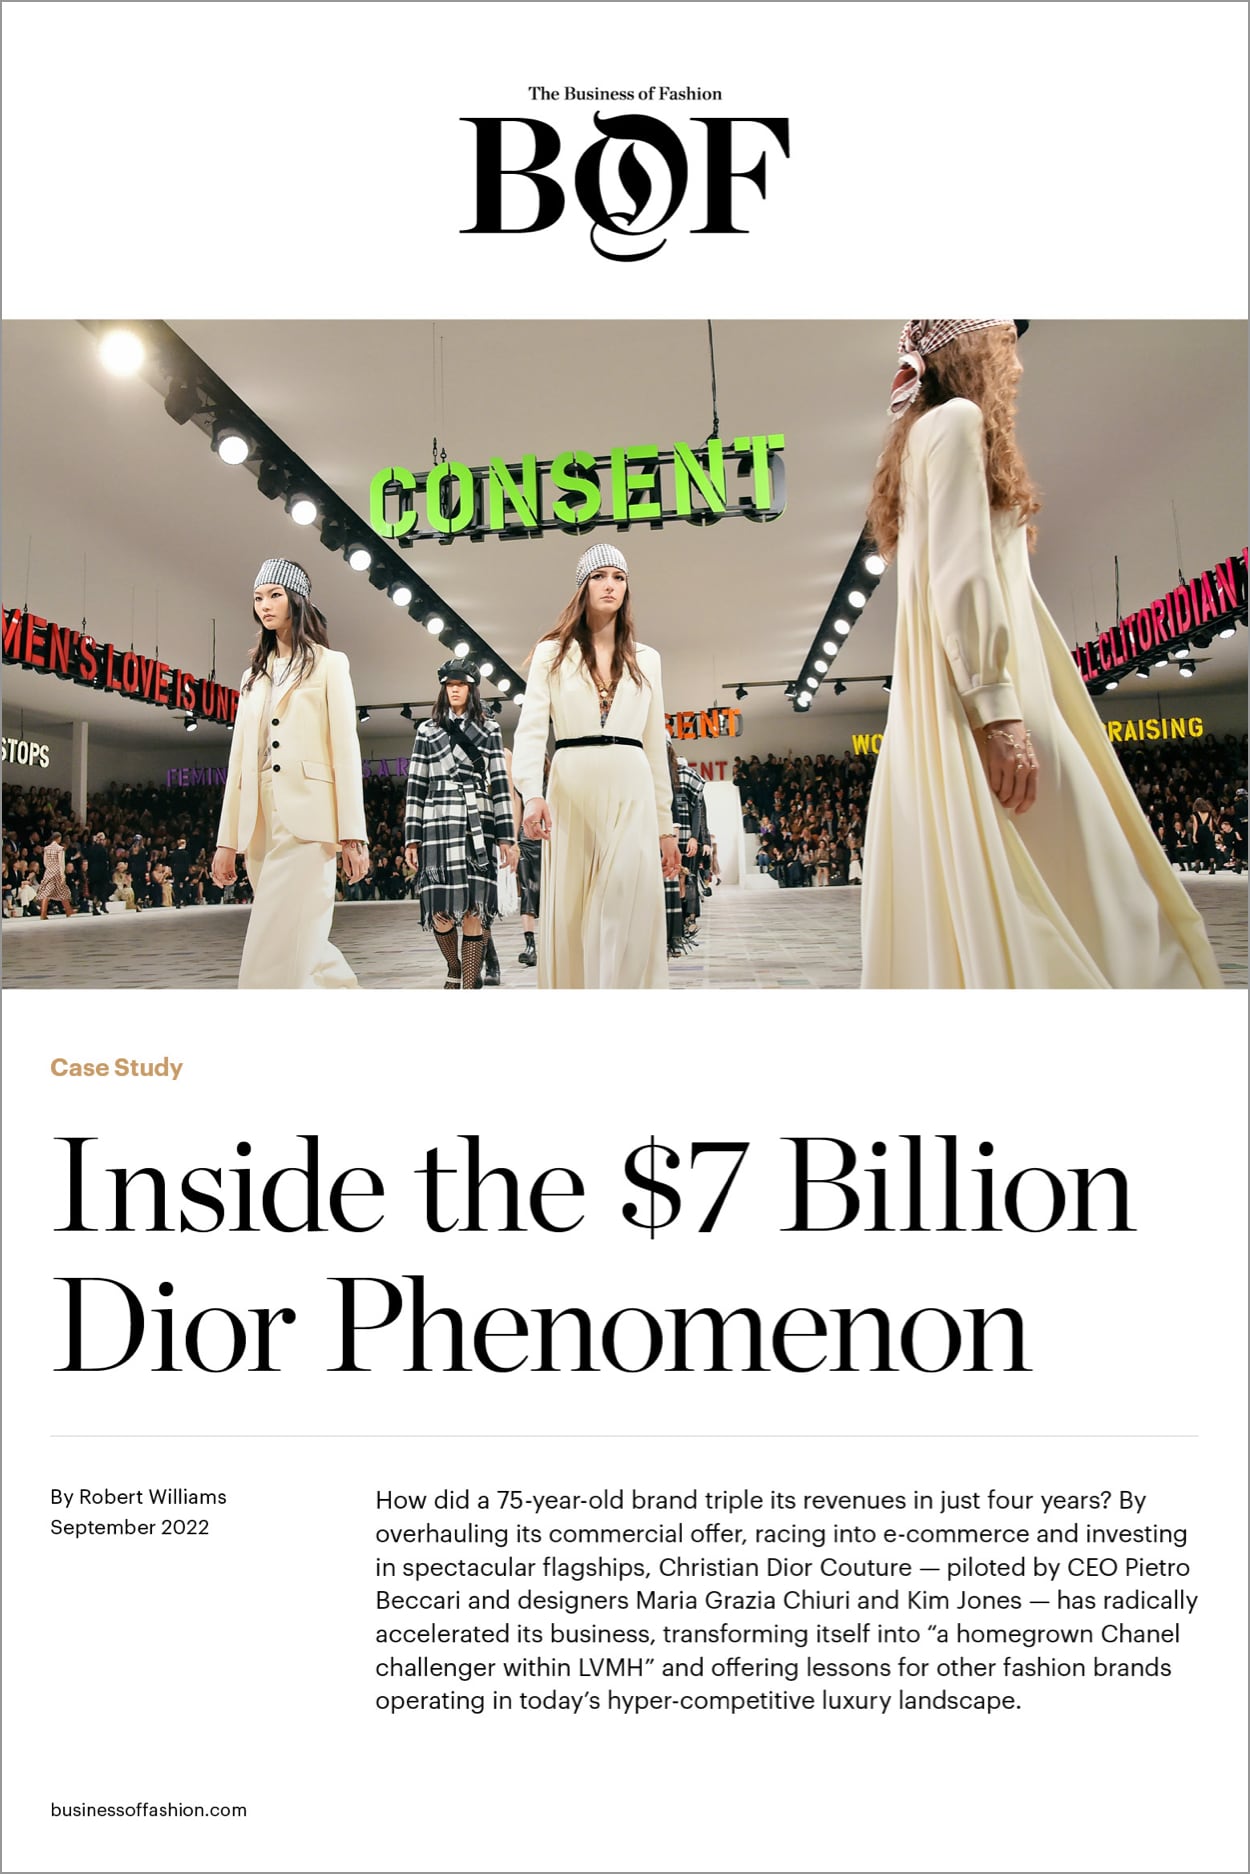 Christian Dior SE : Shareholders Board Members Managers and